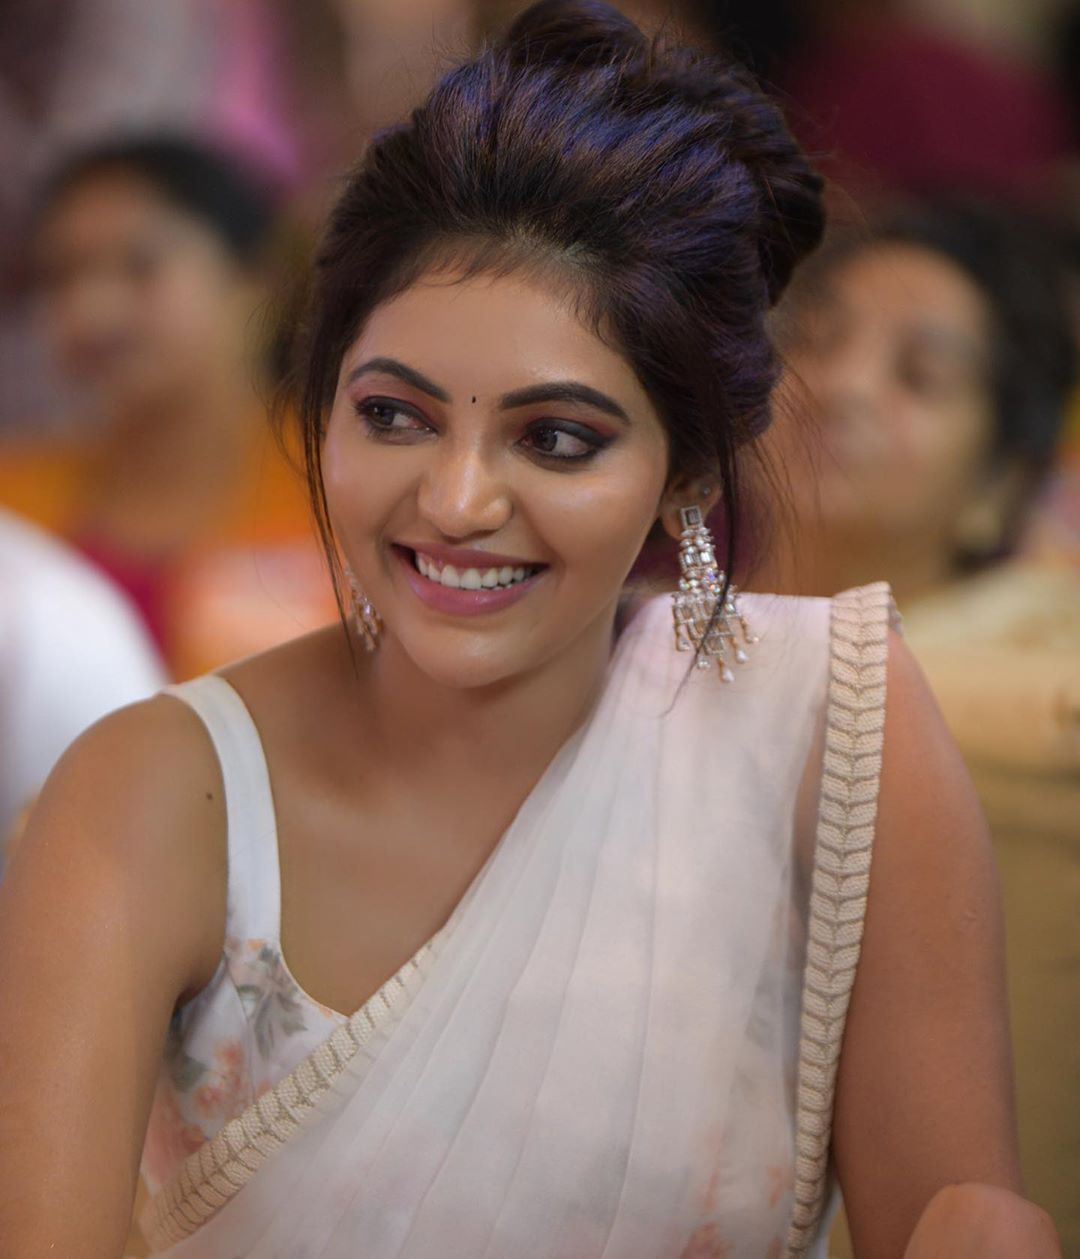 athulya ravi face has been seemed to changed after plastic surgery commented by fans and netizens